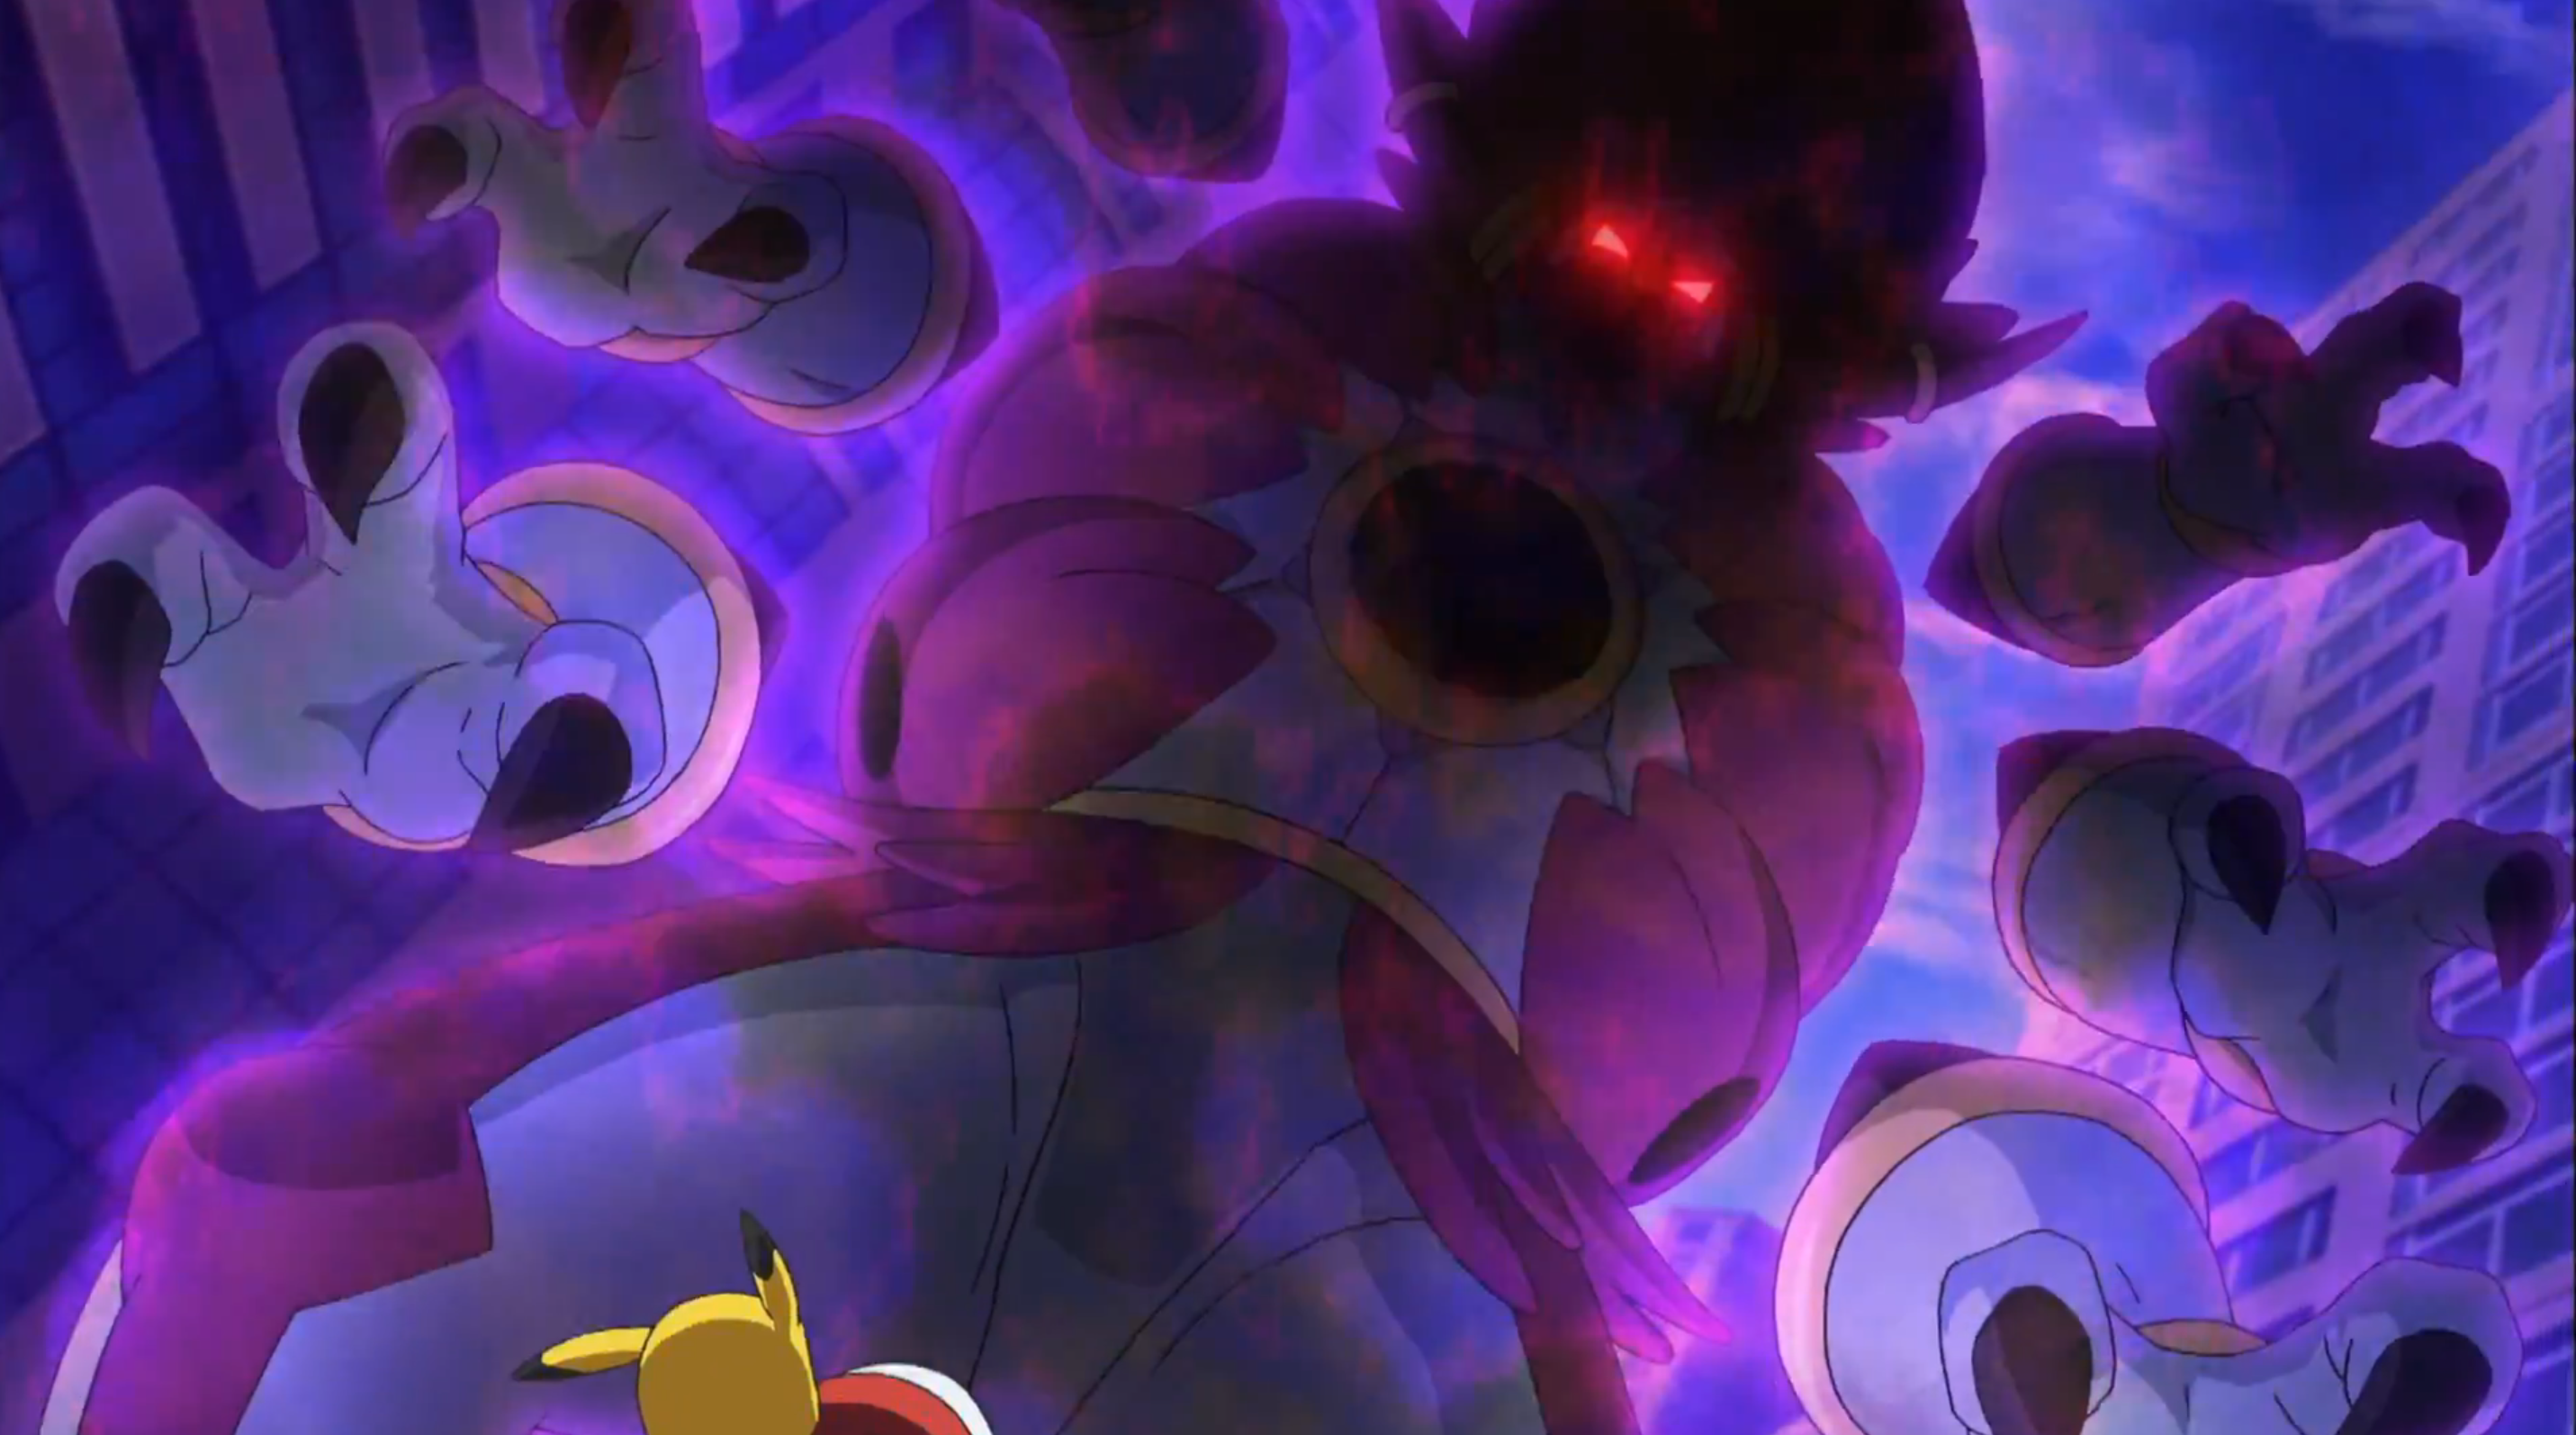 The Mysterious Pokemon Hoopa Everything You Need To Know